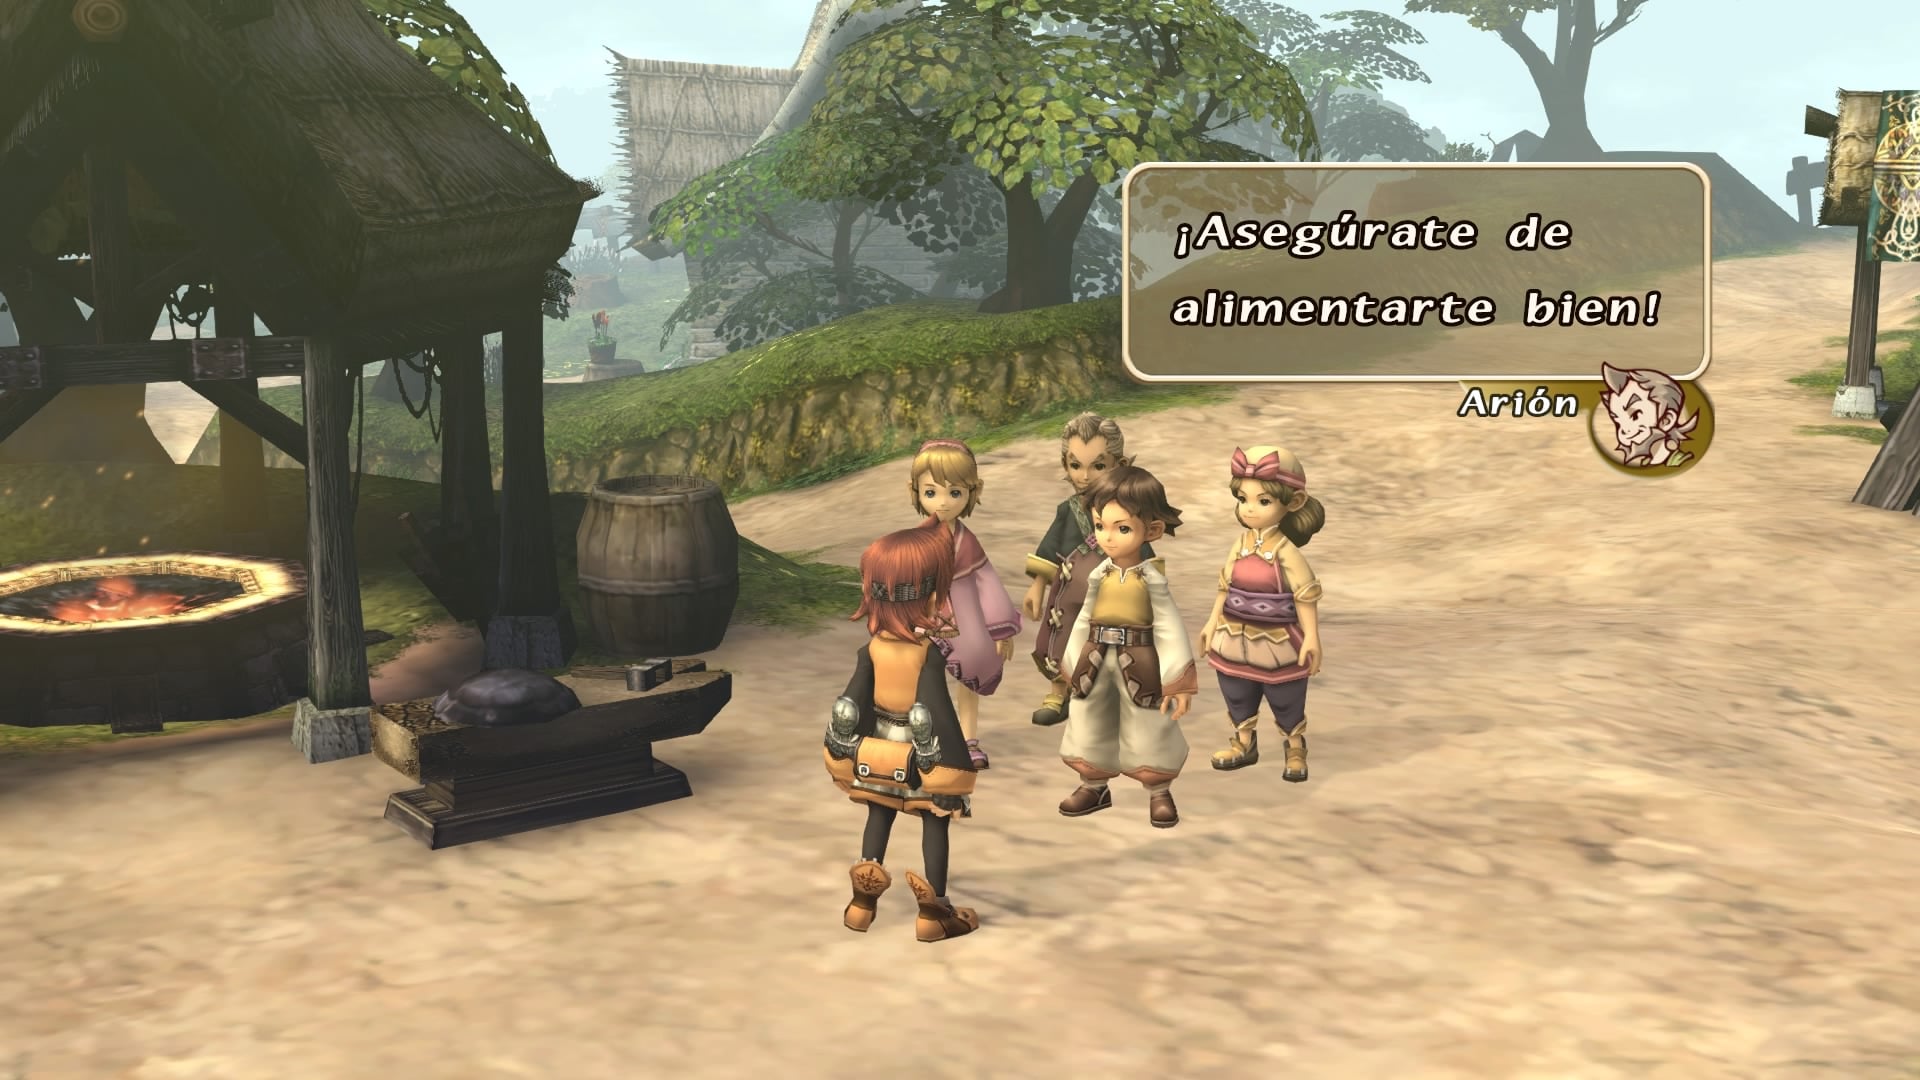 Final Fantasy Crystal Chronicles Remastered Edition Review